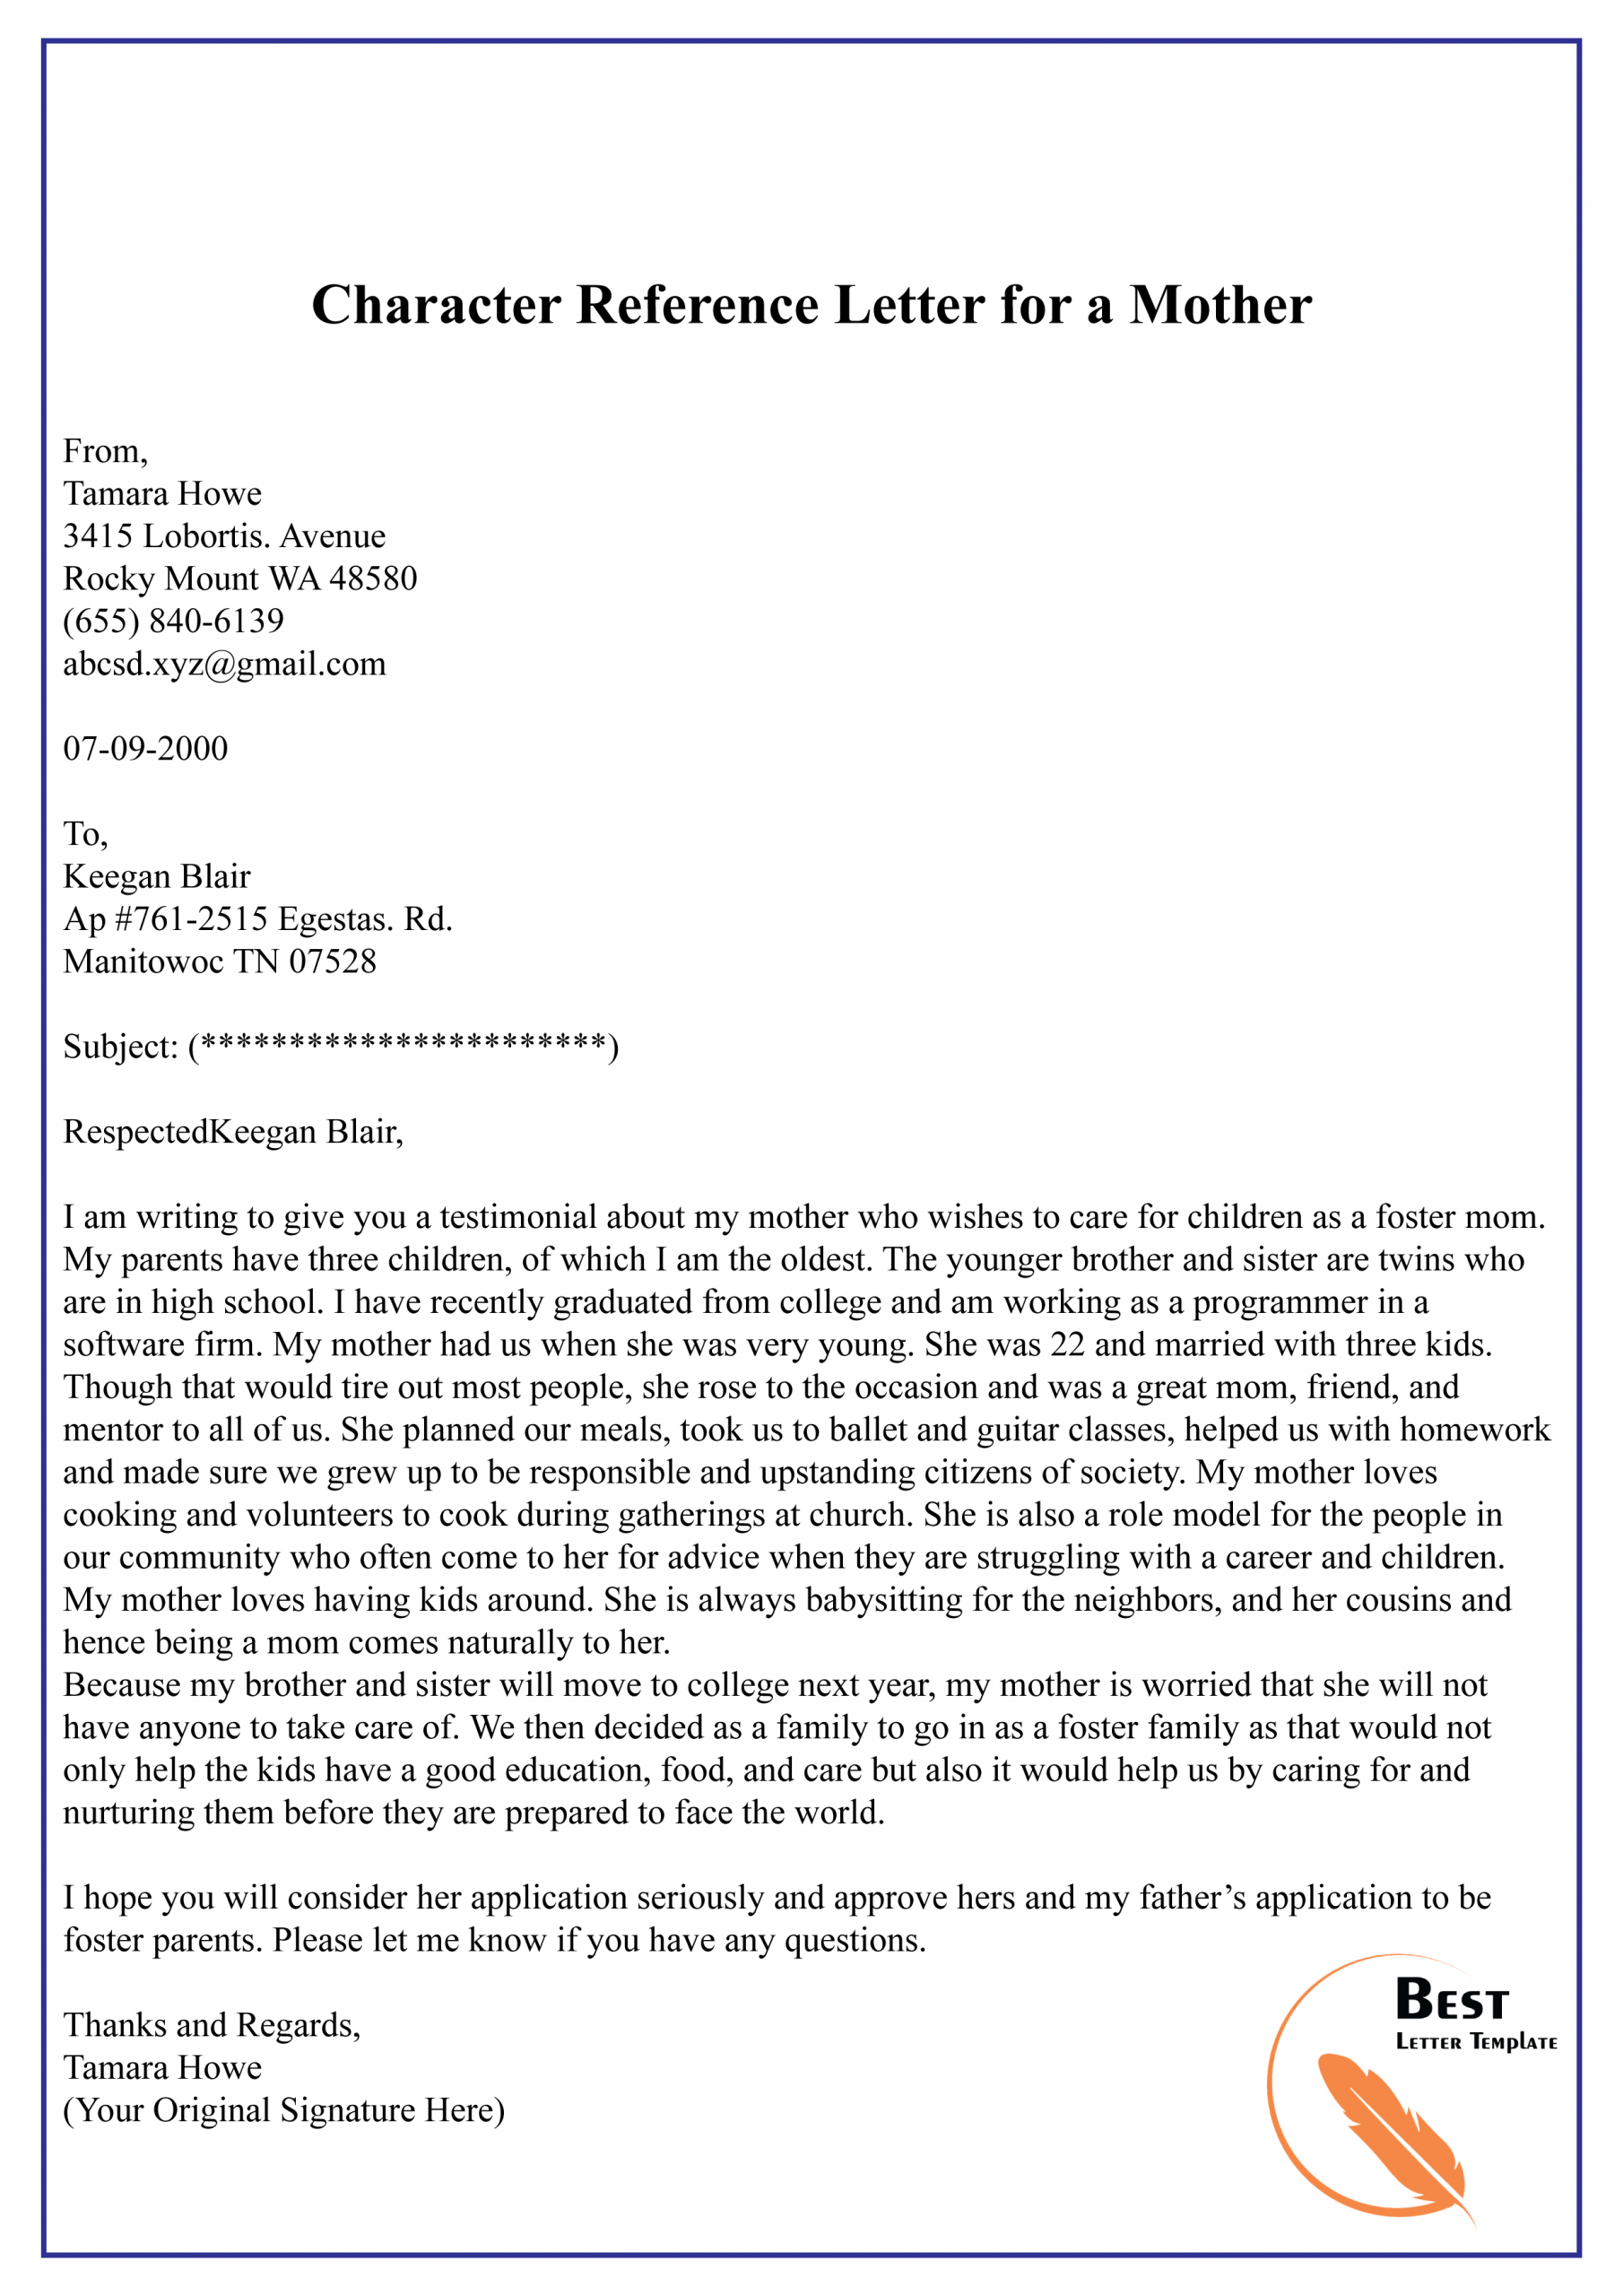 Character Reference Letter For A Mother 01 Best Letter pertaining to dimensions 2480 X 3508